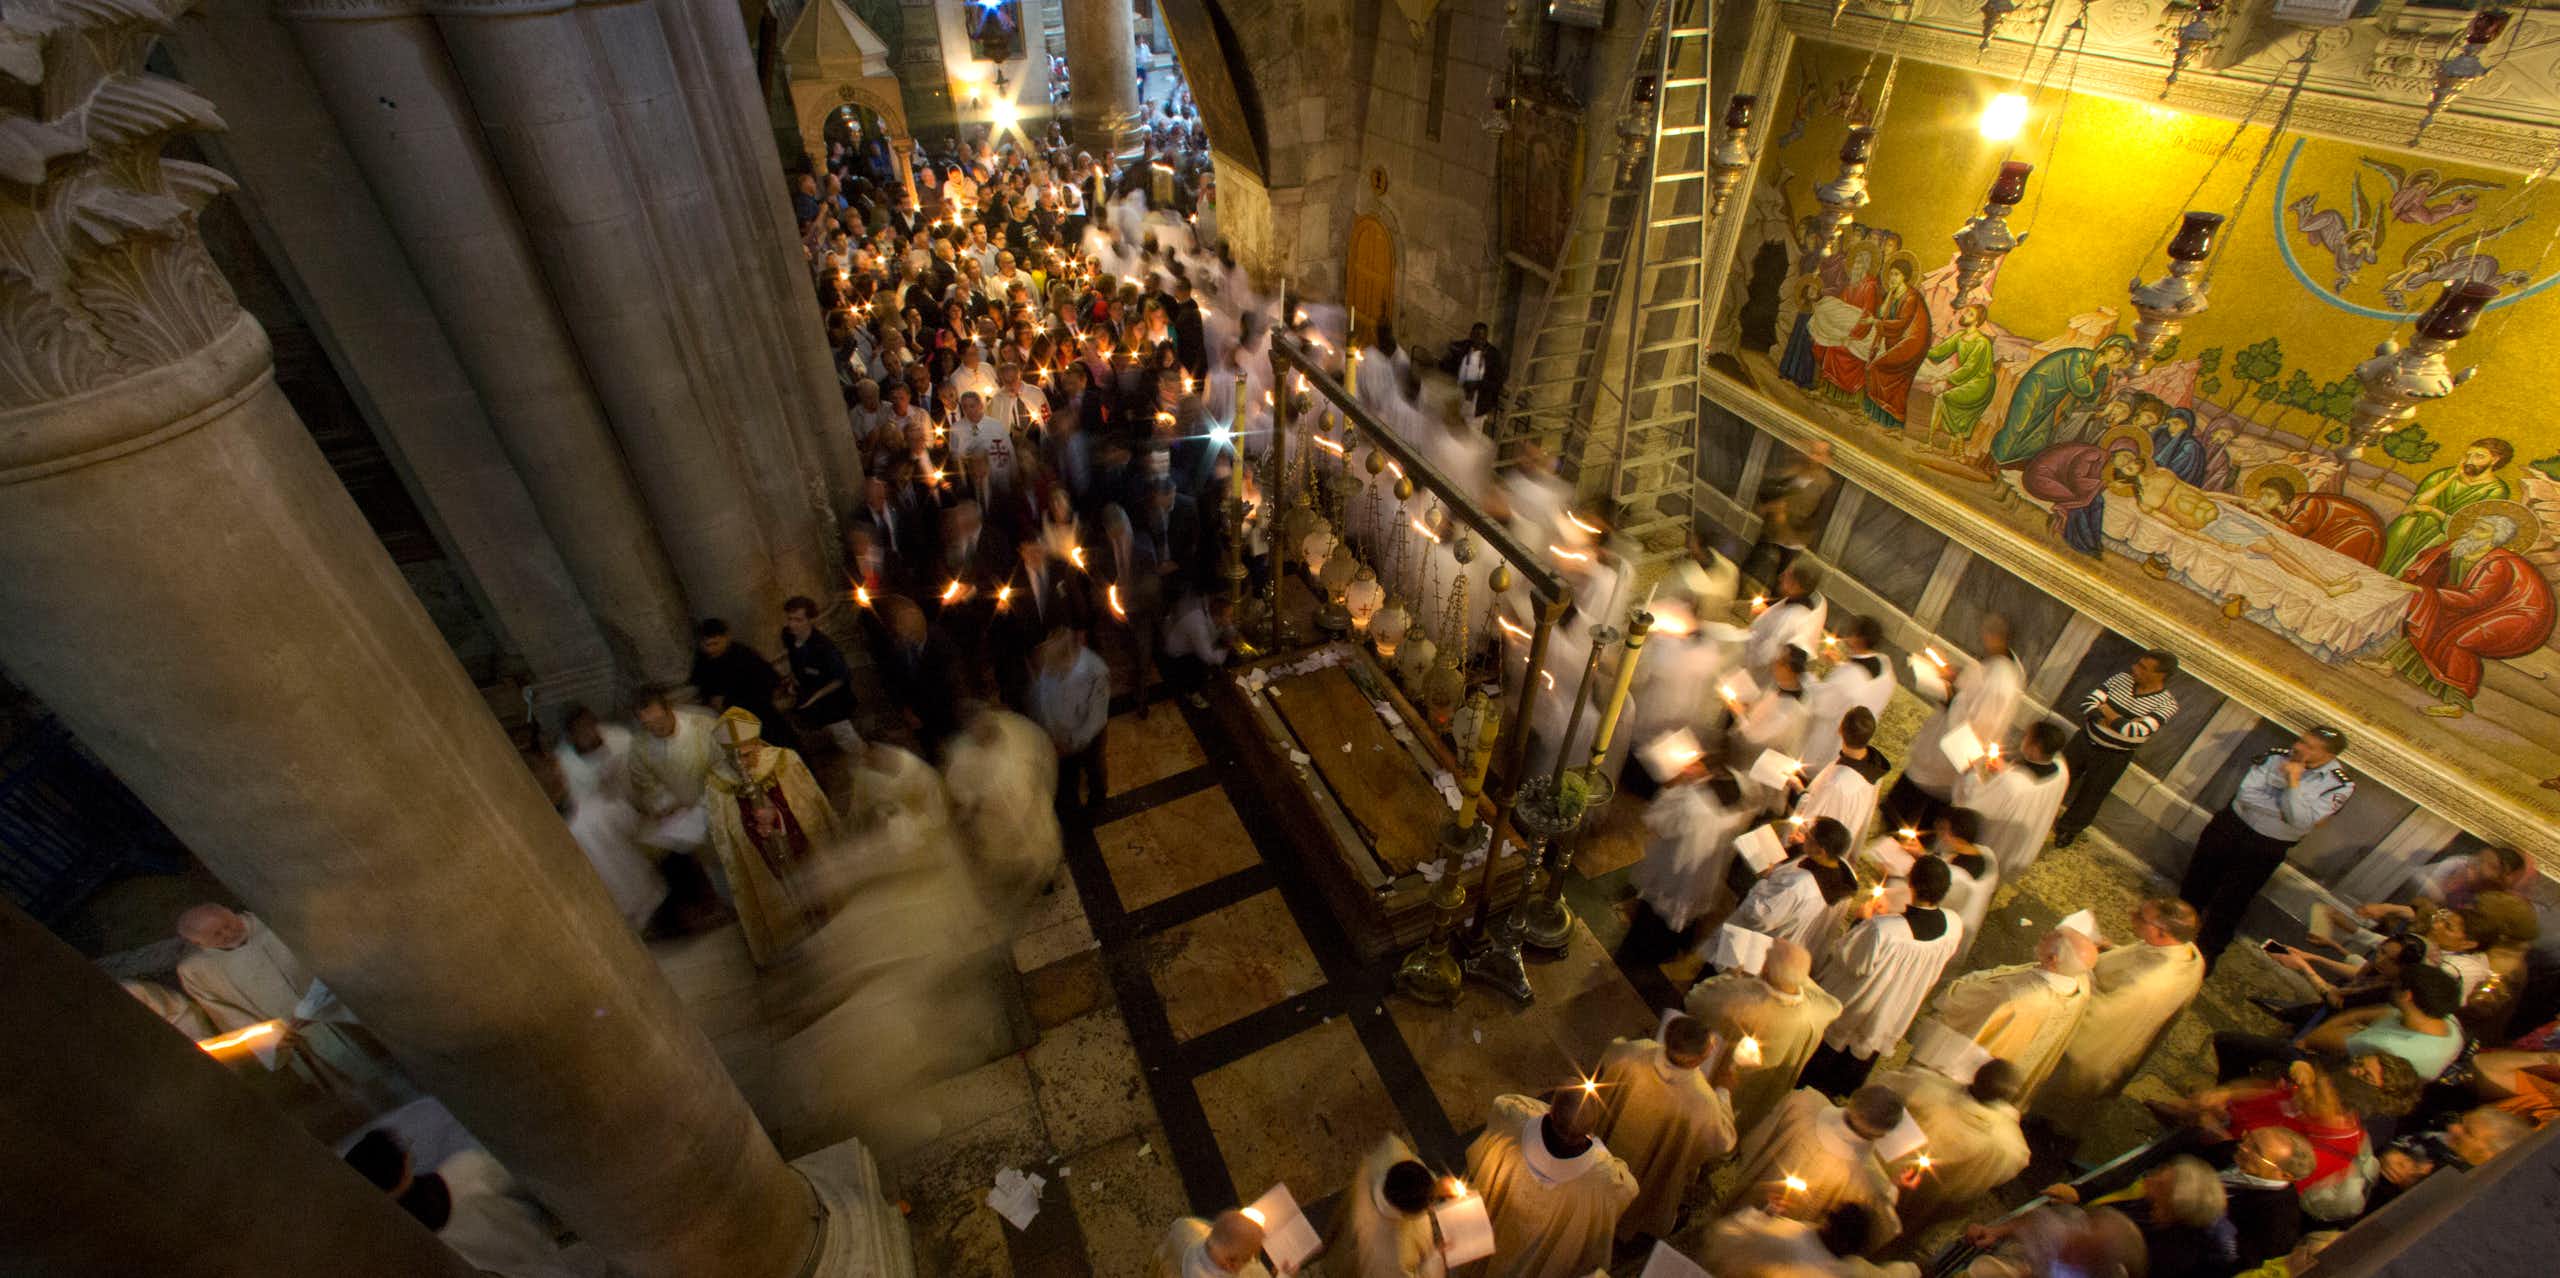 Men in white priestly robes walk in a procession while holding candles through a hallway with ornate pillars and a wall with paintings depicting followers surrounding Jesus' body.